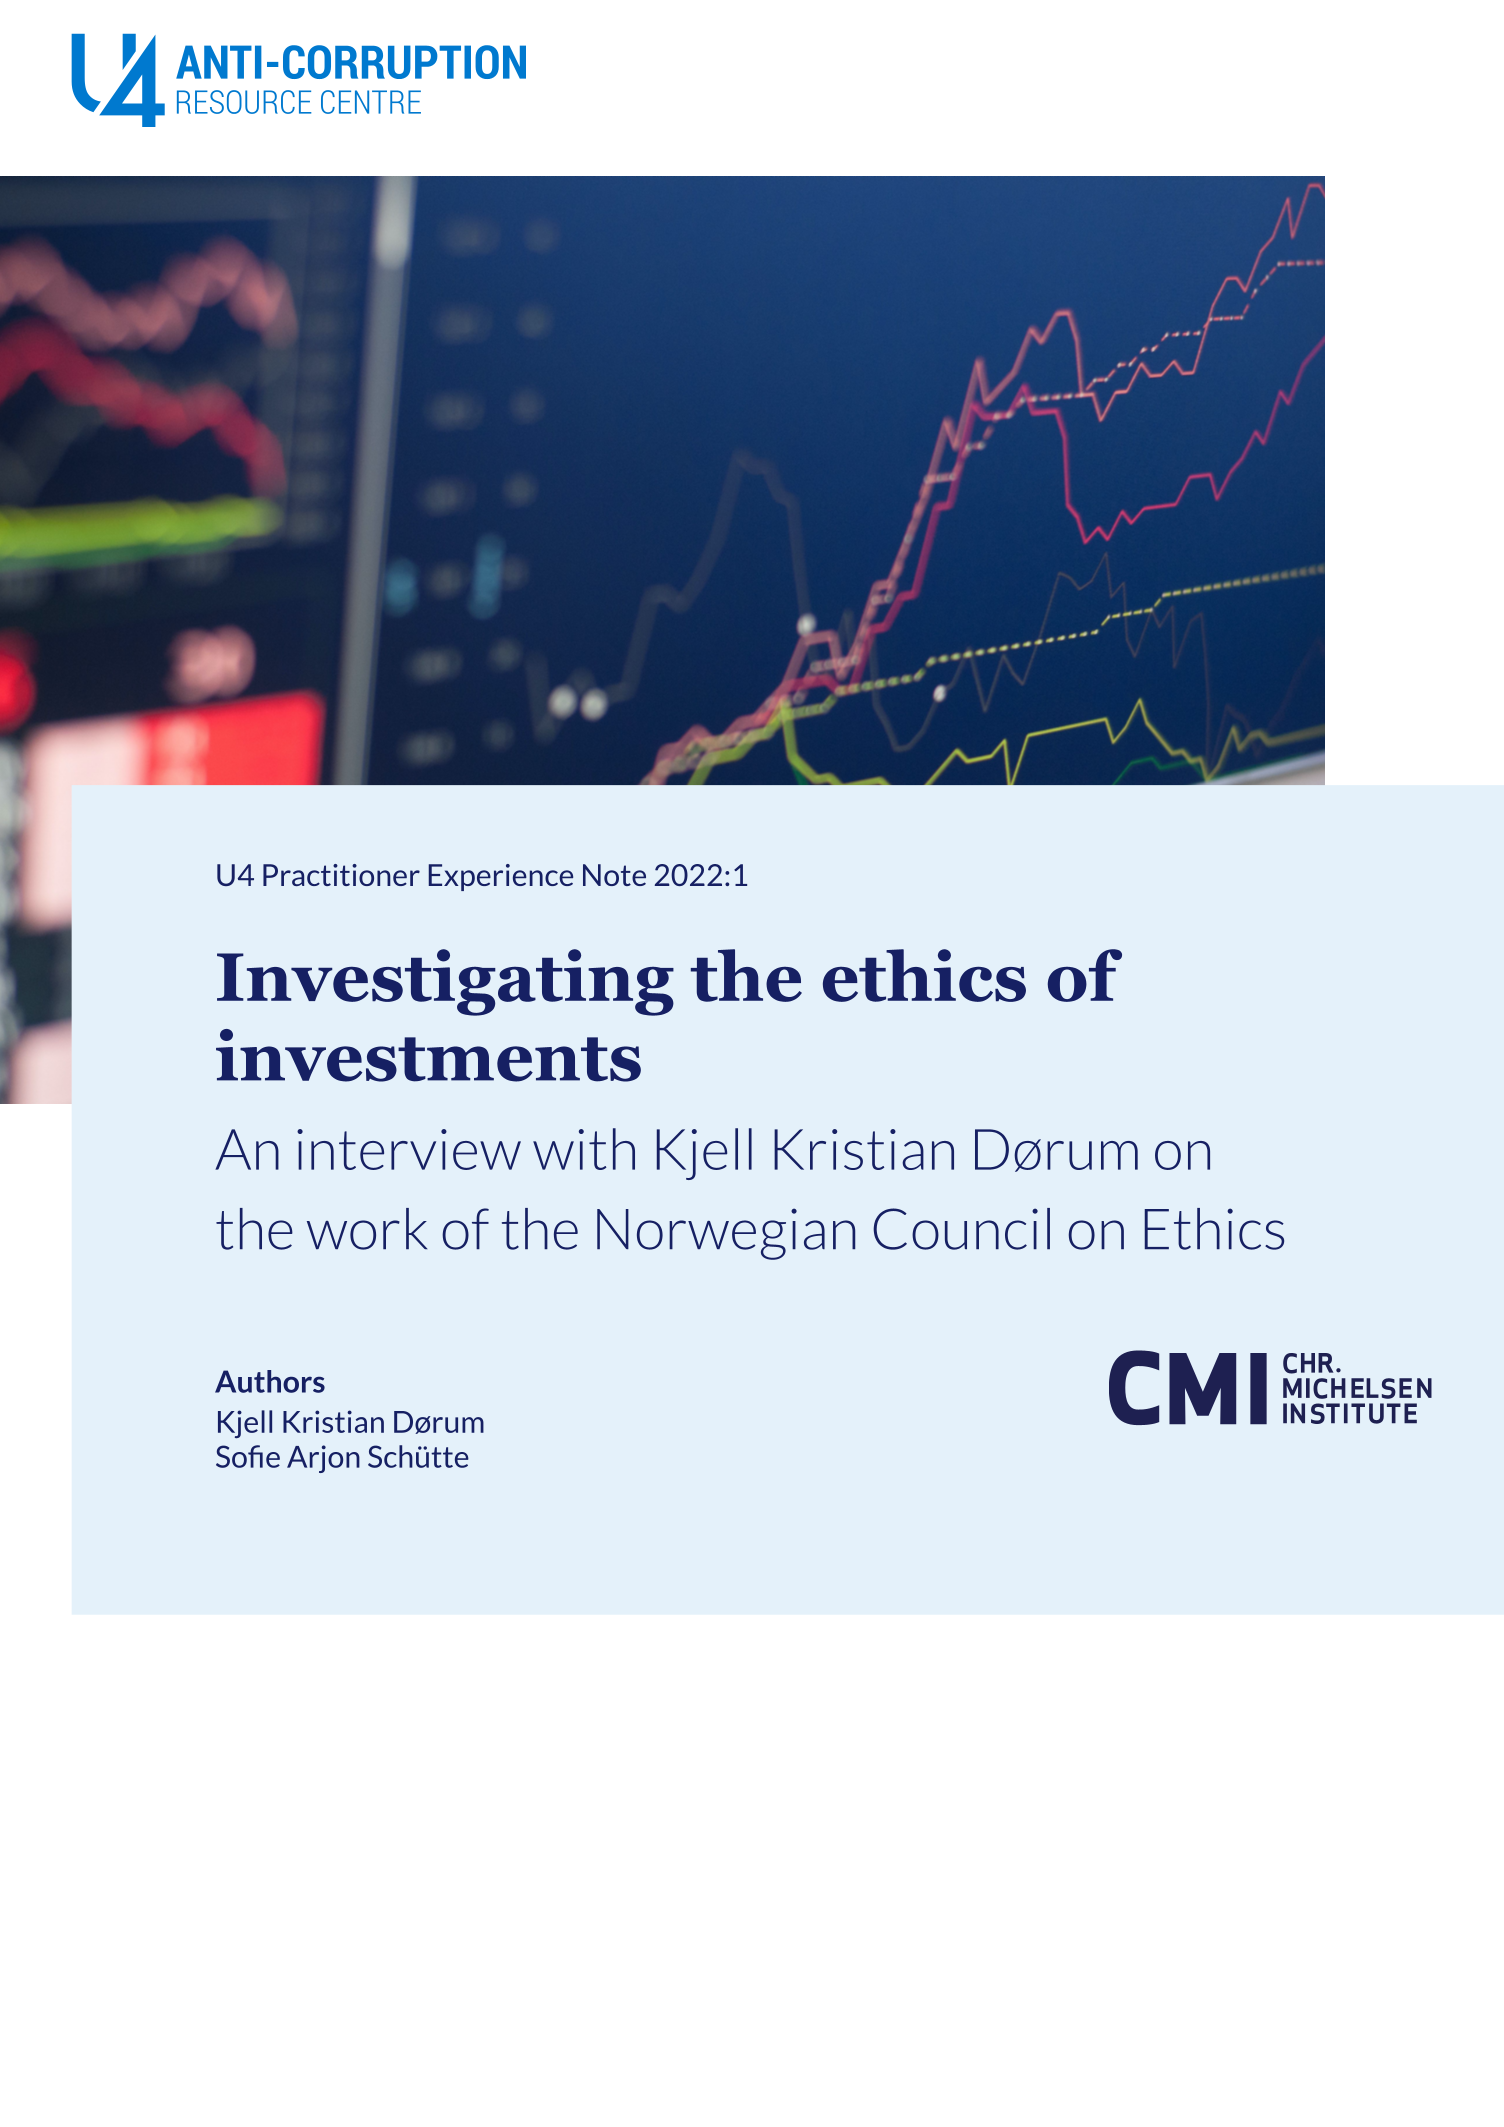 Investigating the ethics of investments